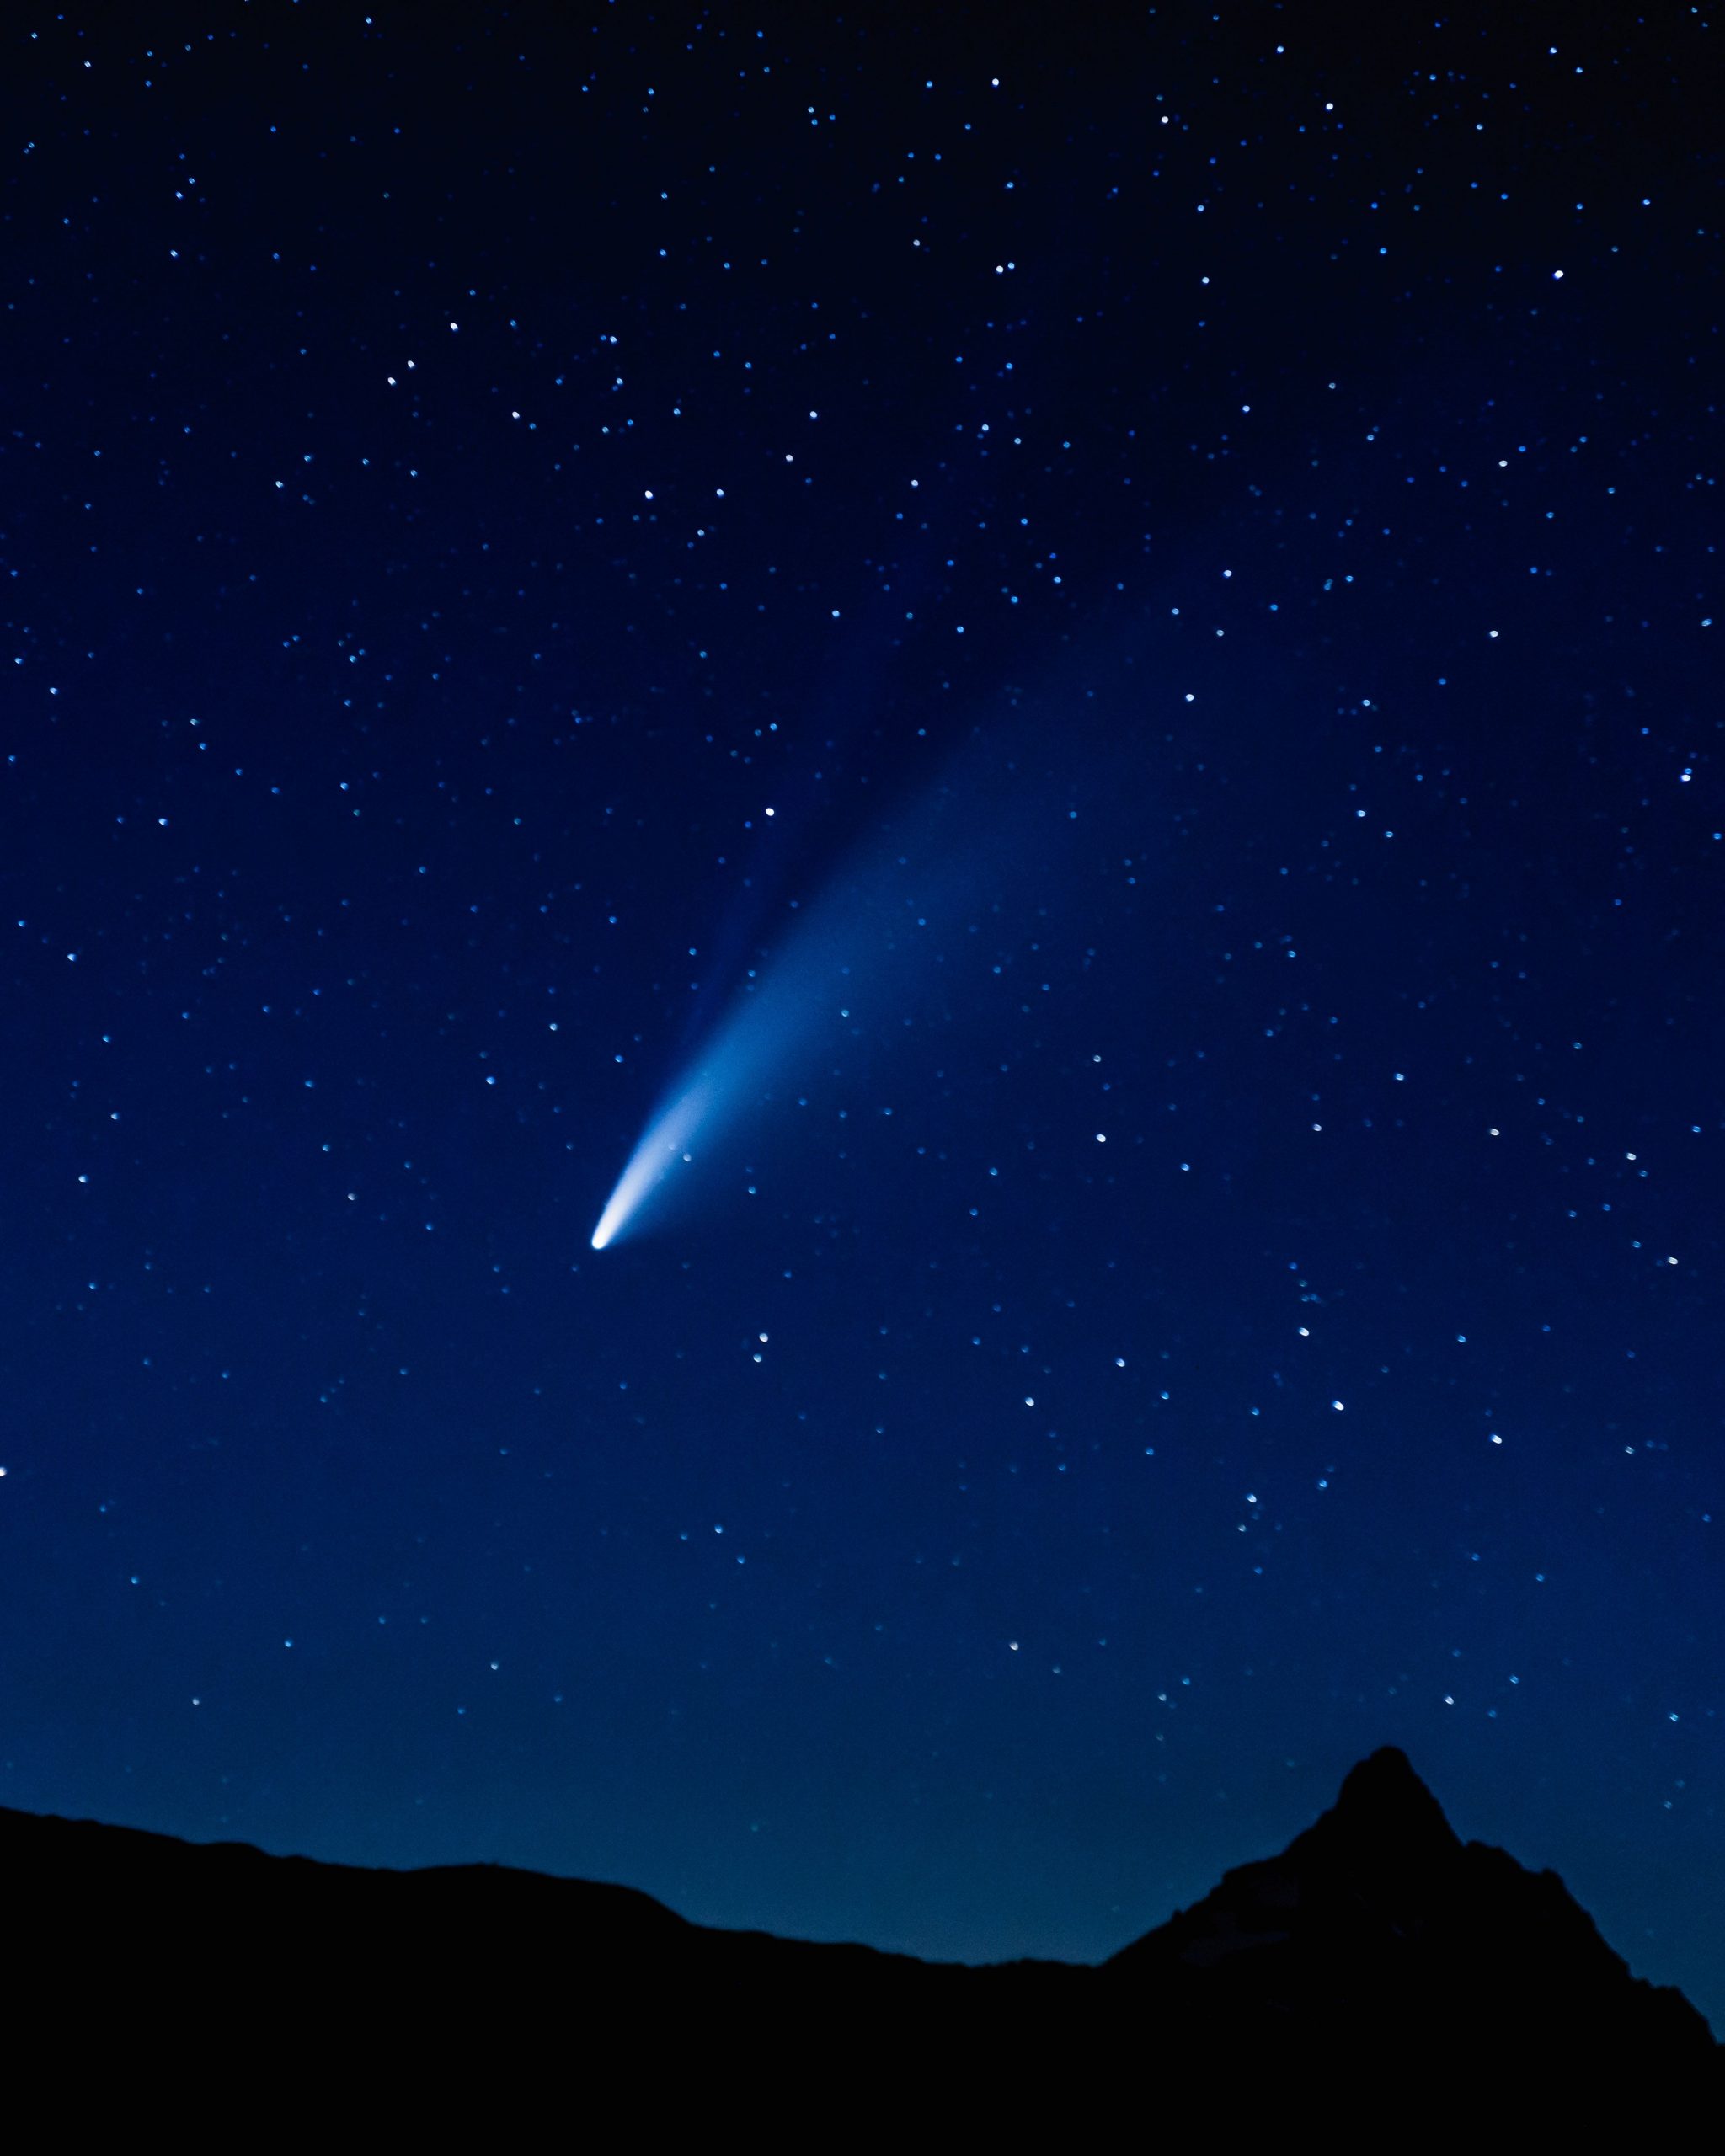 Researchers believe a comet might have caused decline of Hopwell culture